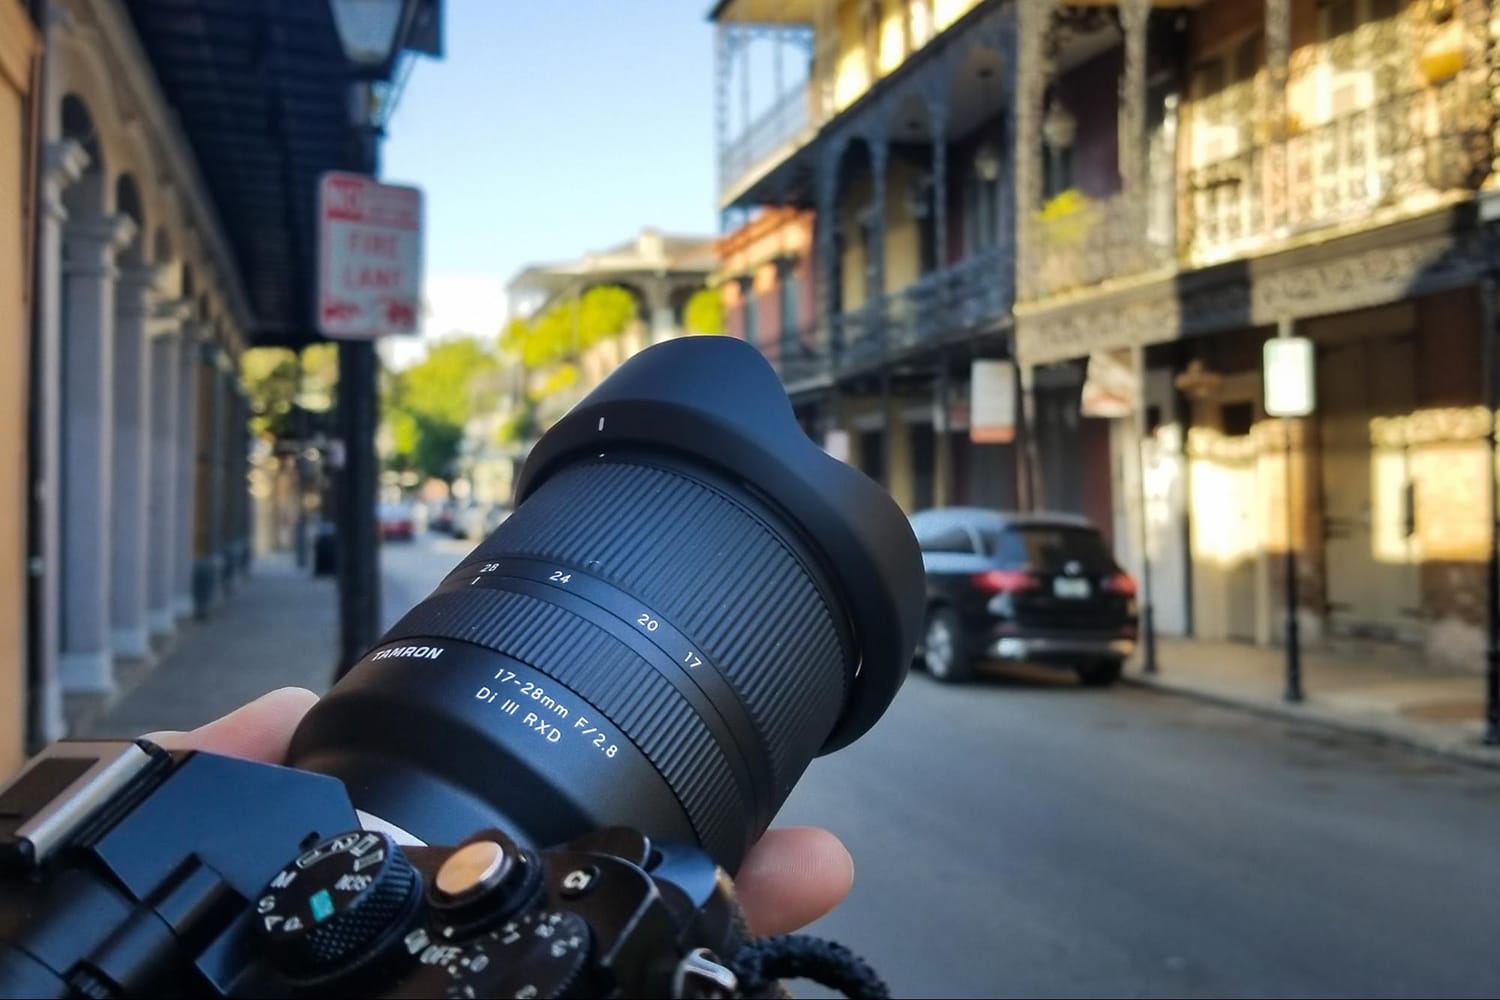 Hands-On Review of the Tamron 17-28mm f/2.8 Di III RXD FE-Mount Lens